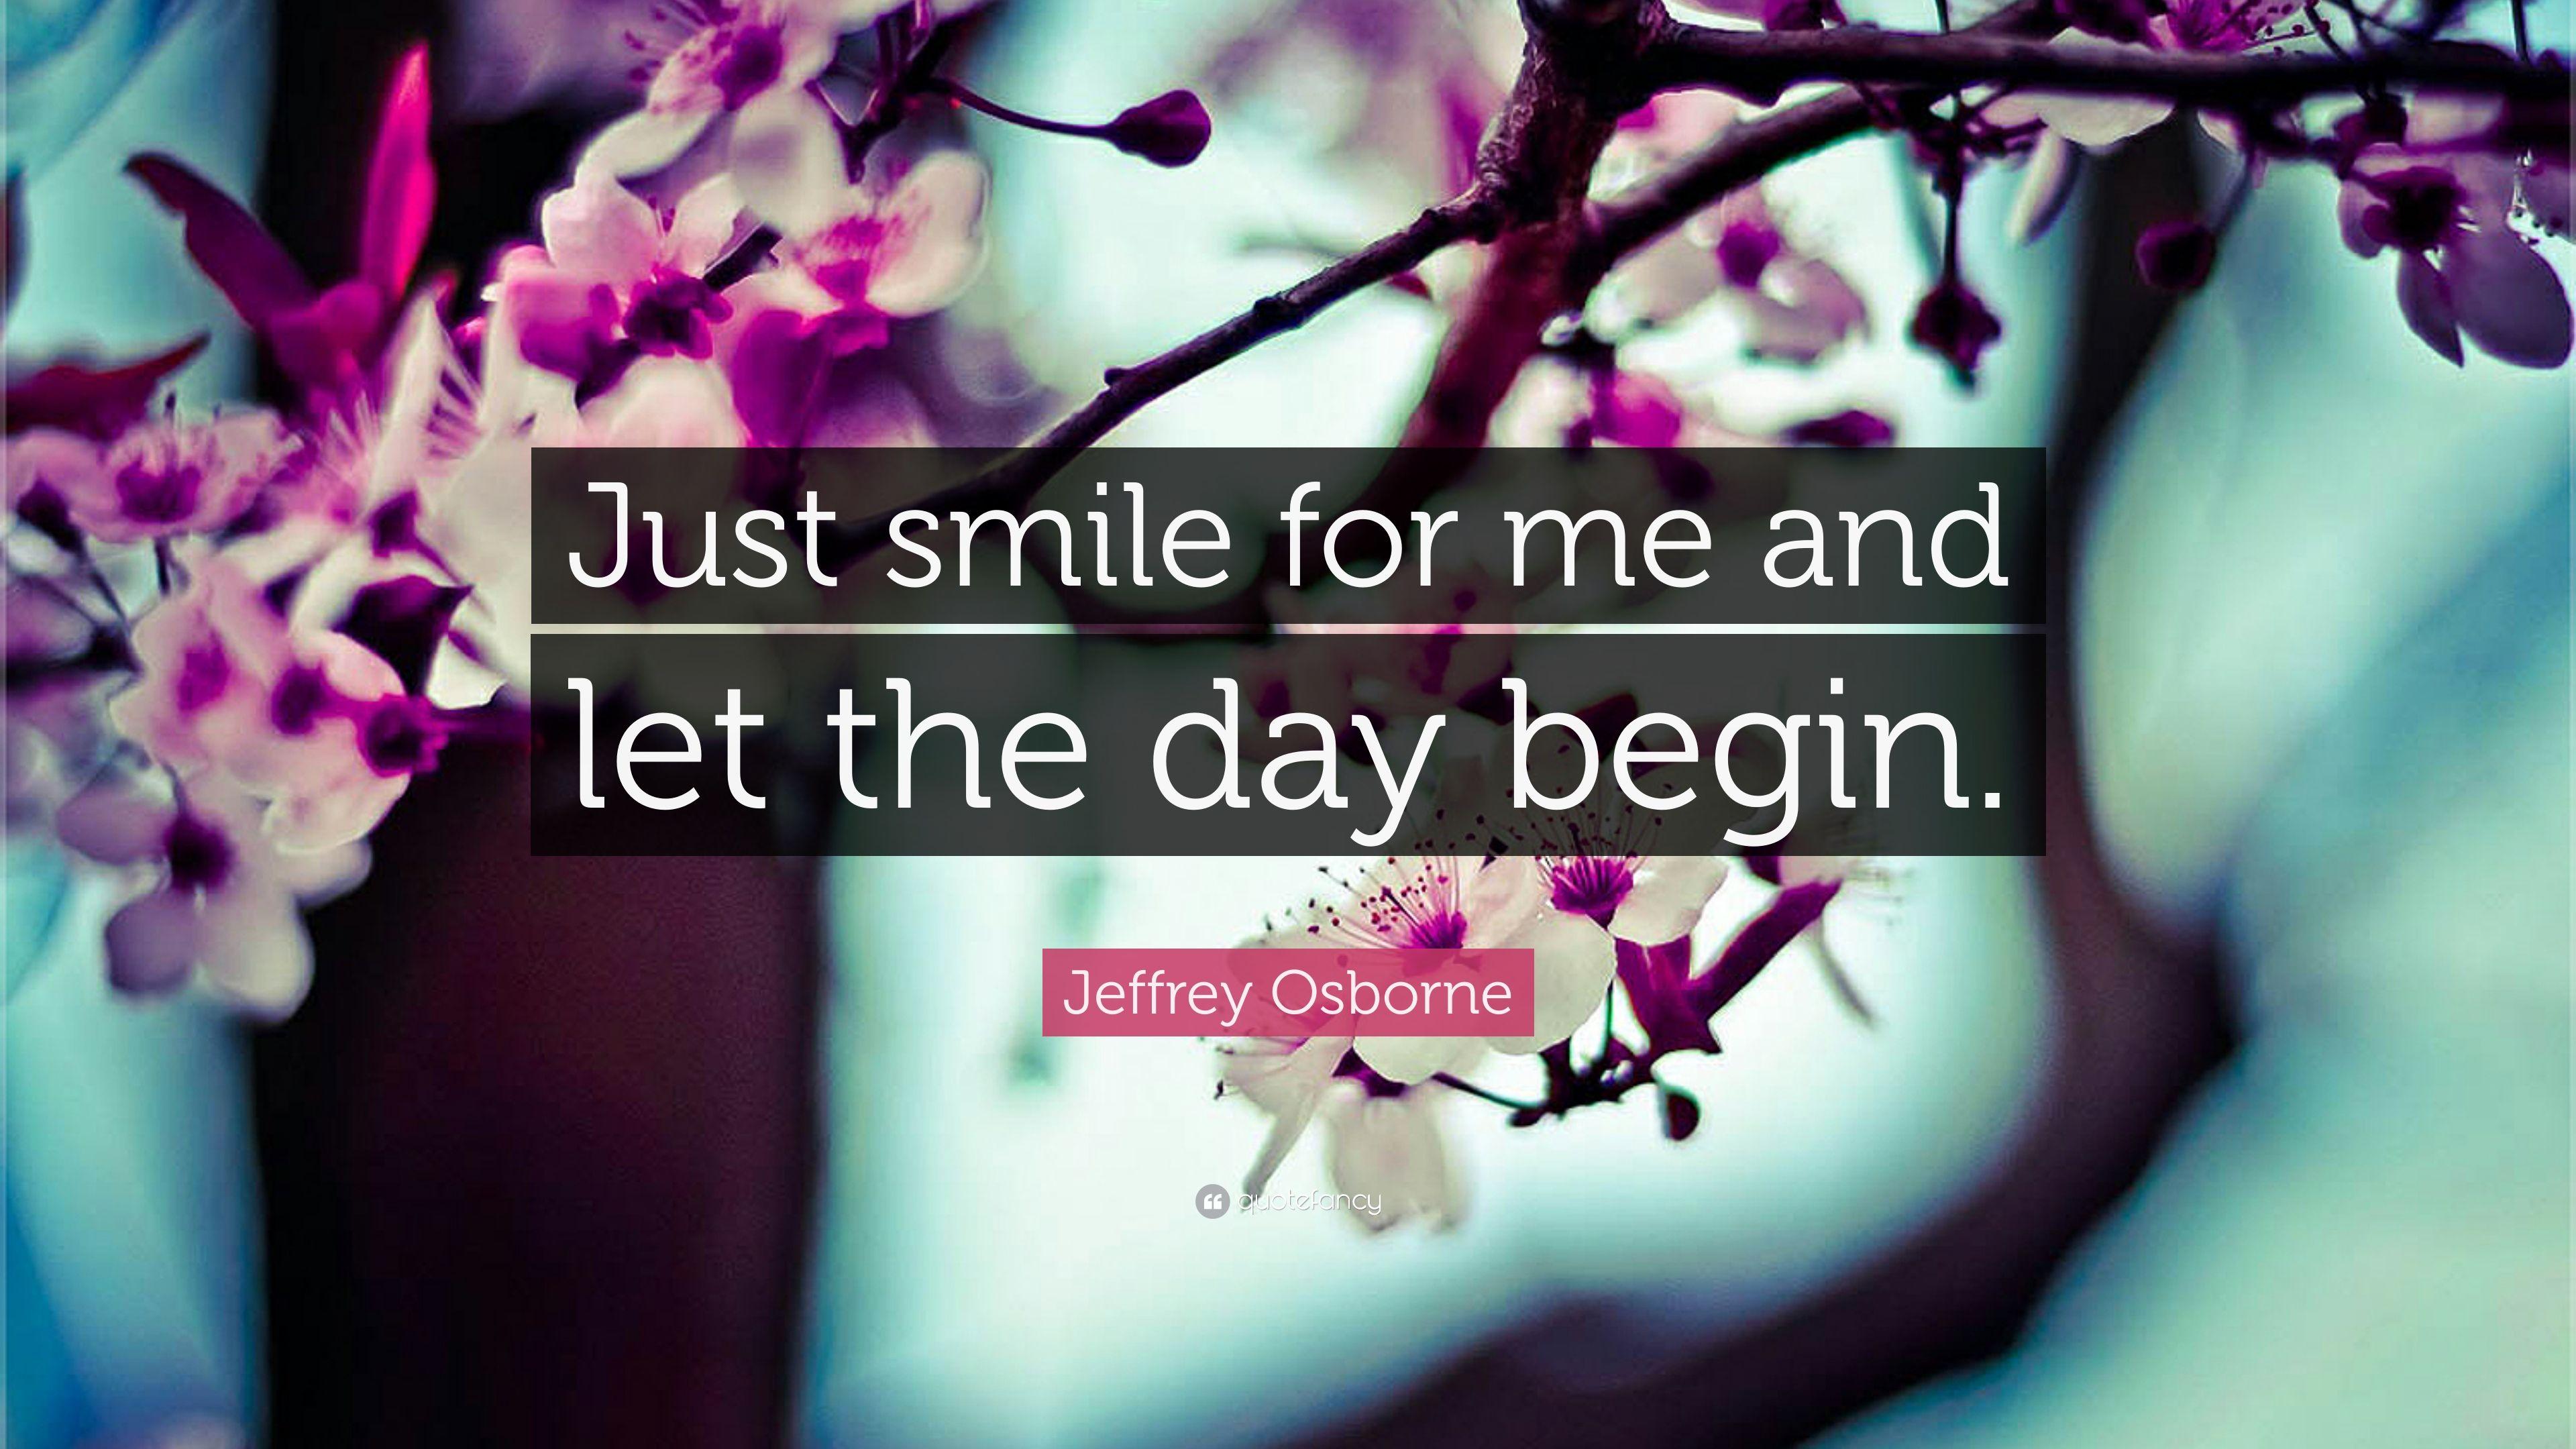 Jeffrey Osborne Quote: "Just smile for me and let the day begin. 